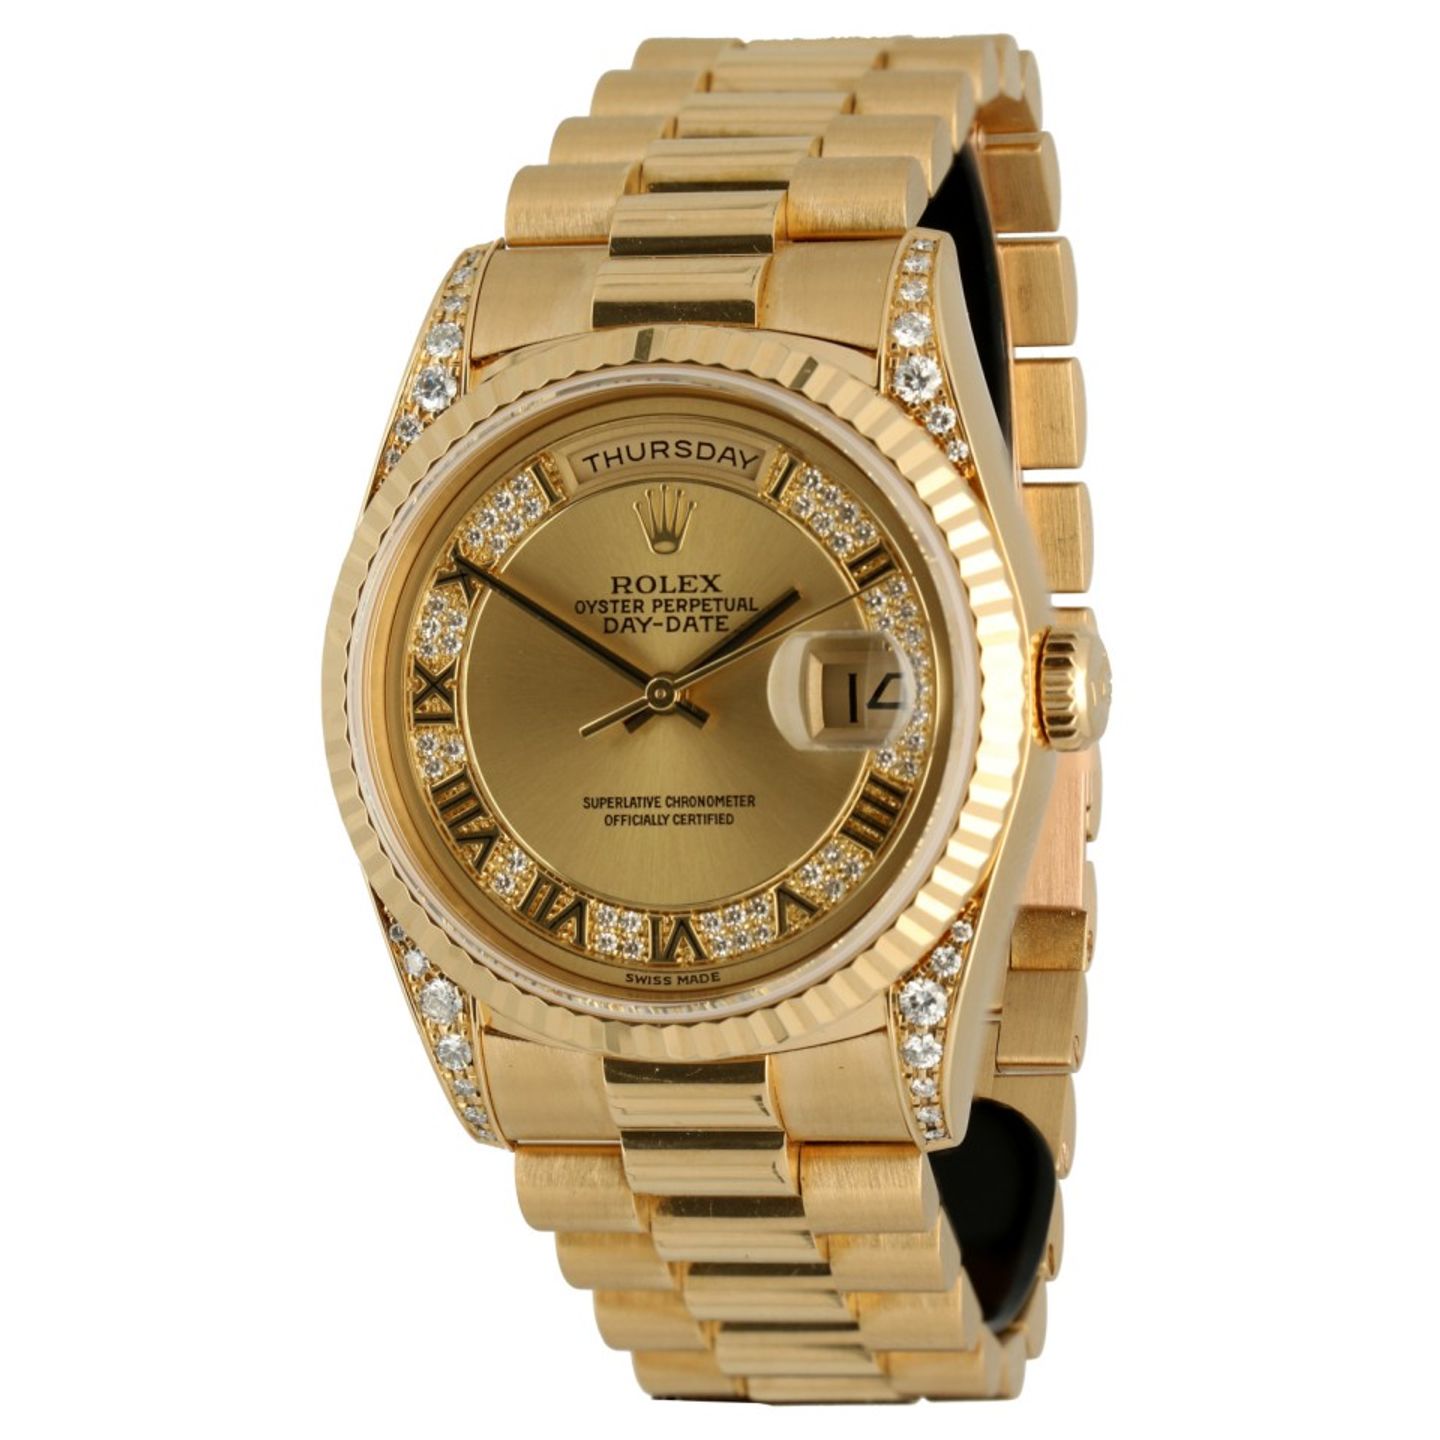 Rolex Day-Date 36 18338 (1995) - Gold dial 36 mm Yellow Gold case (1/6)